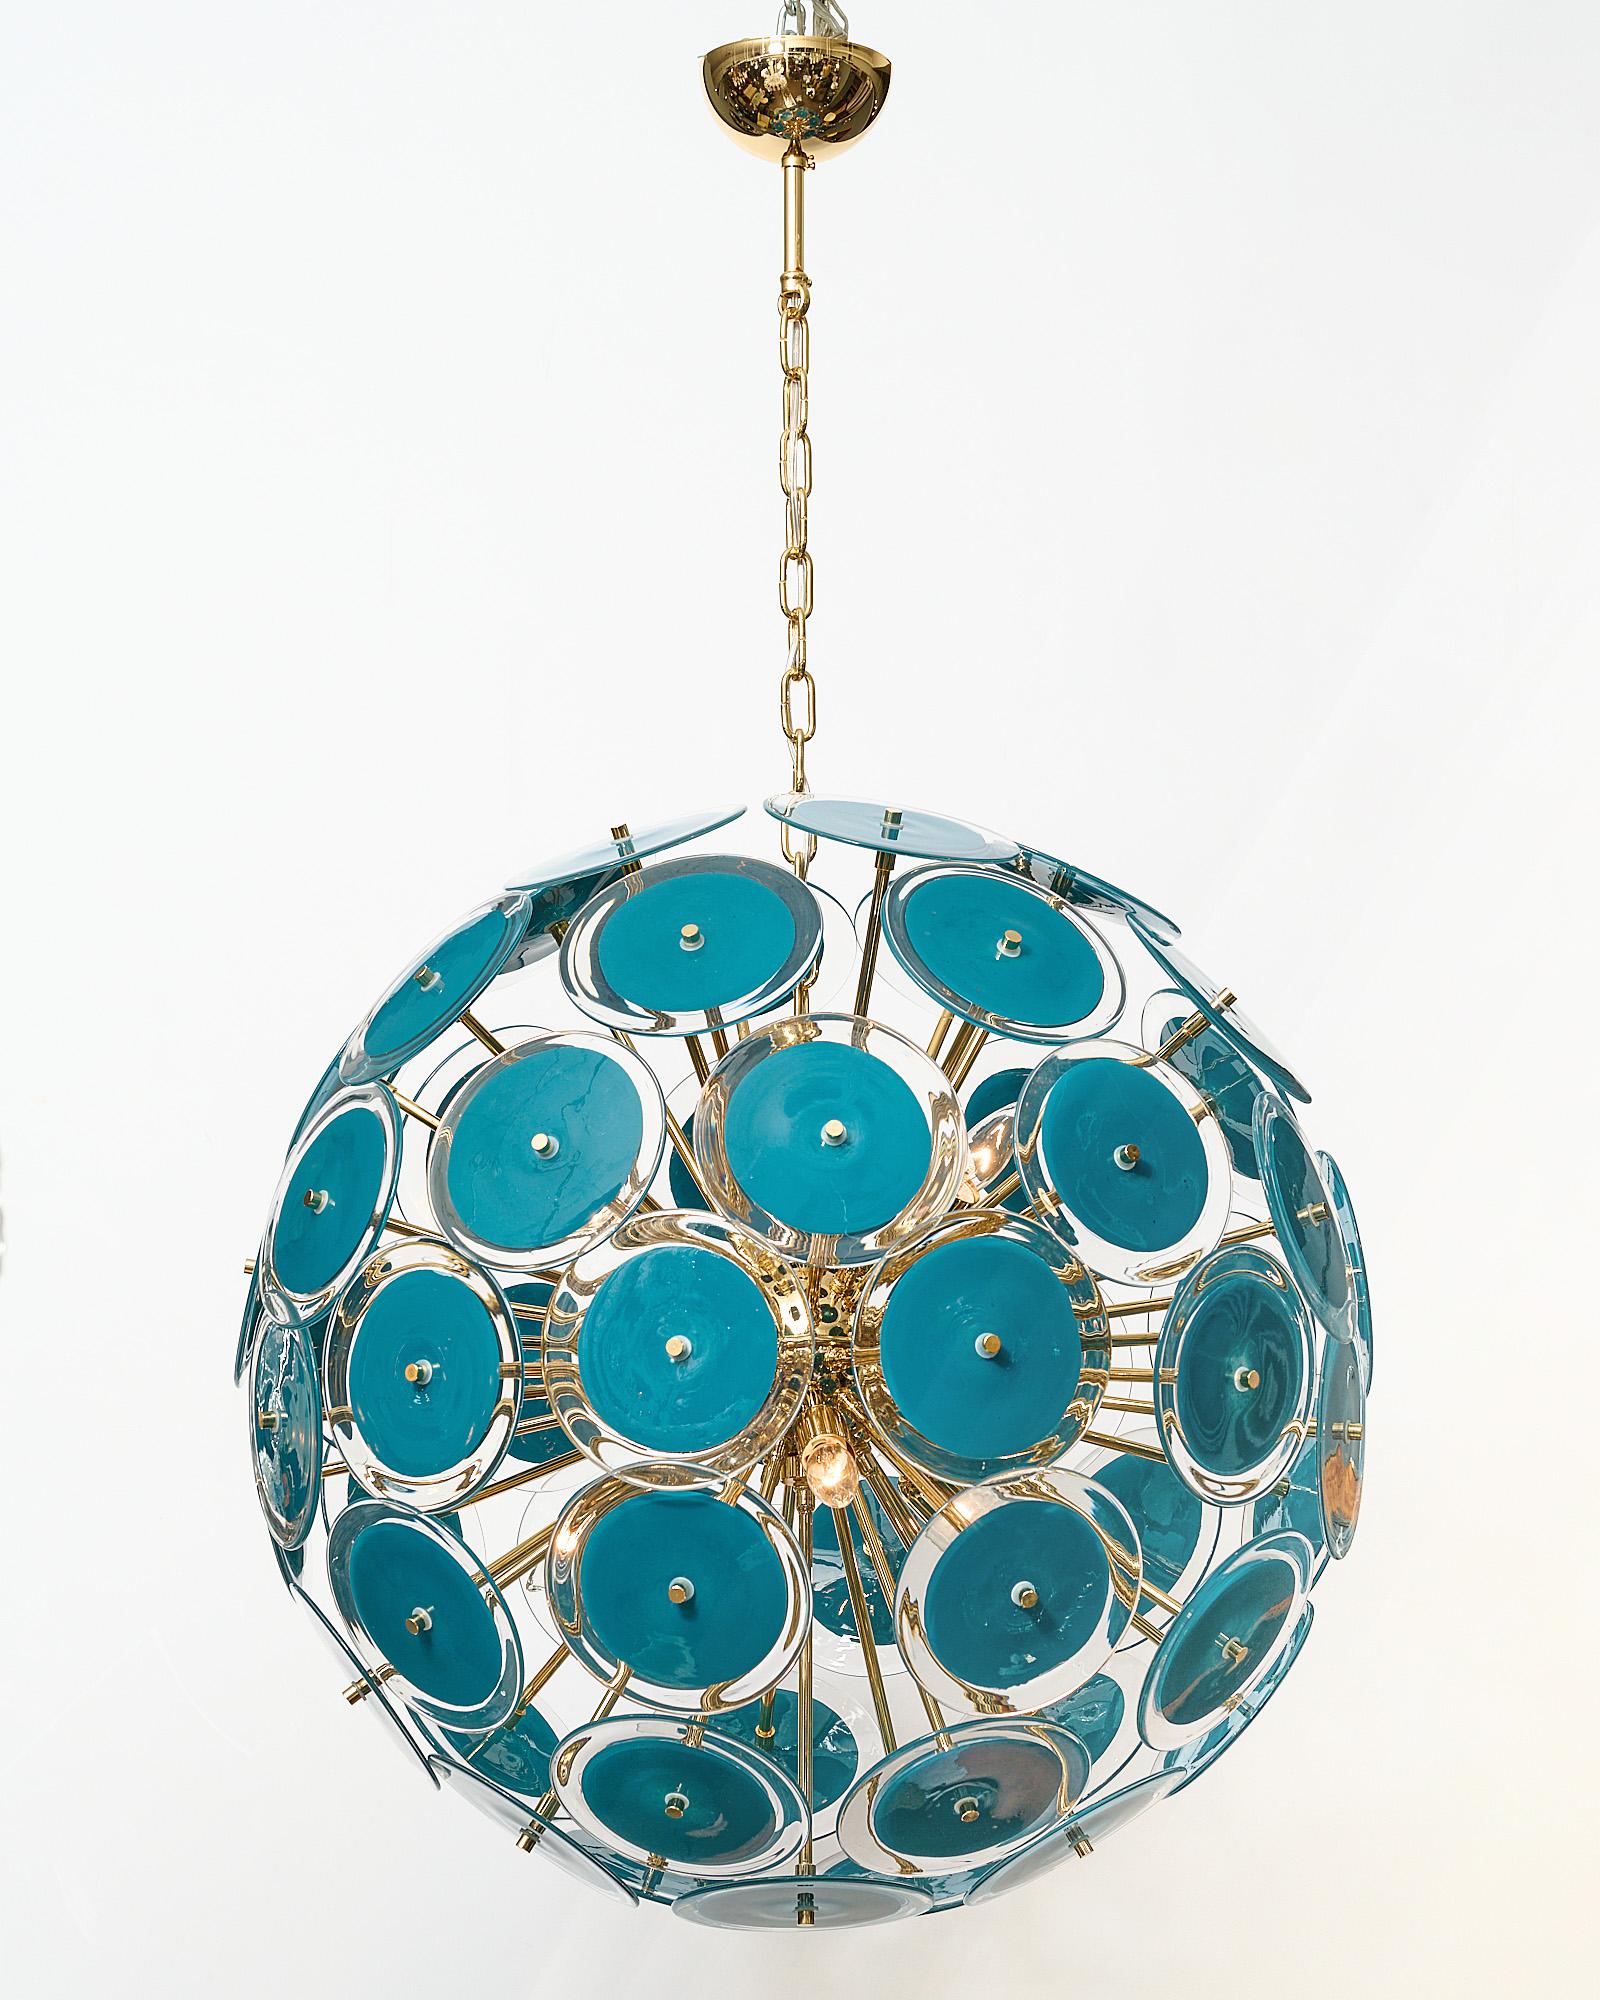 Murano glass chandelier in the sputnik shape with beautiful hand-blown glass discs. Each disc element has opaque teal blue glass rimmed with clear glass. It has been newly wired to fit US standards.